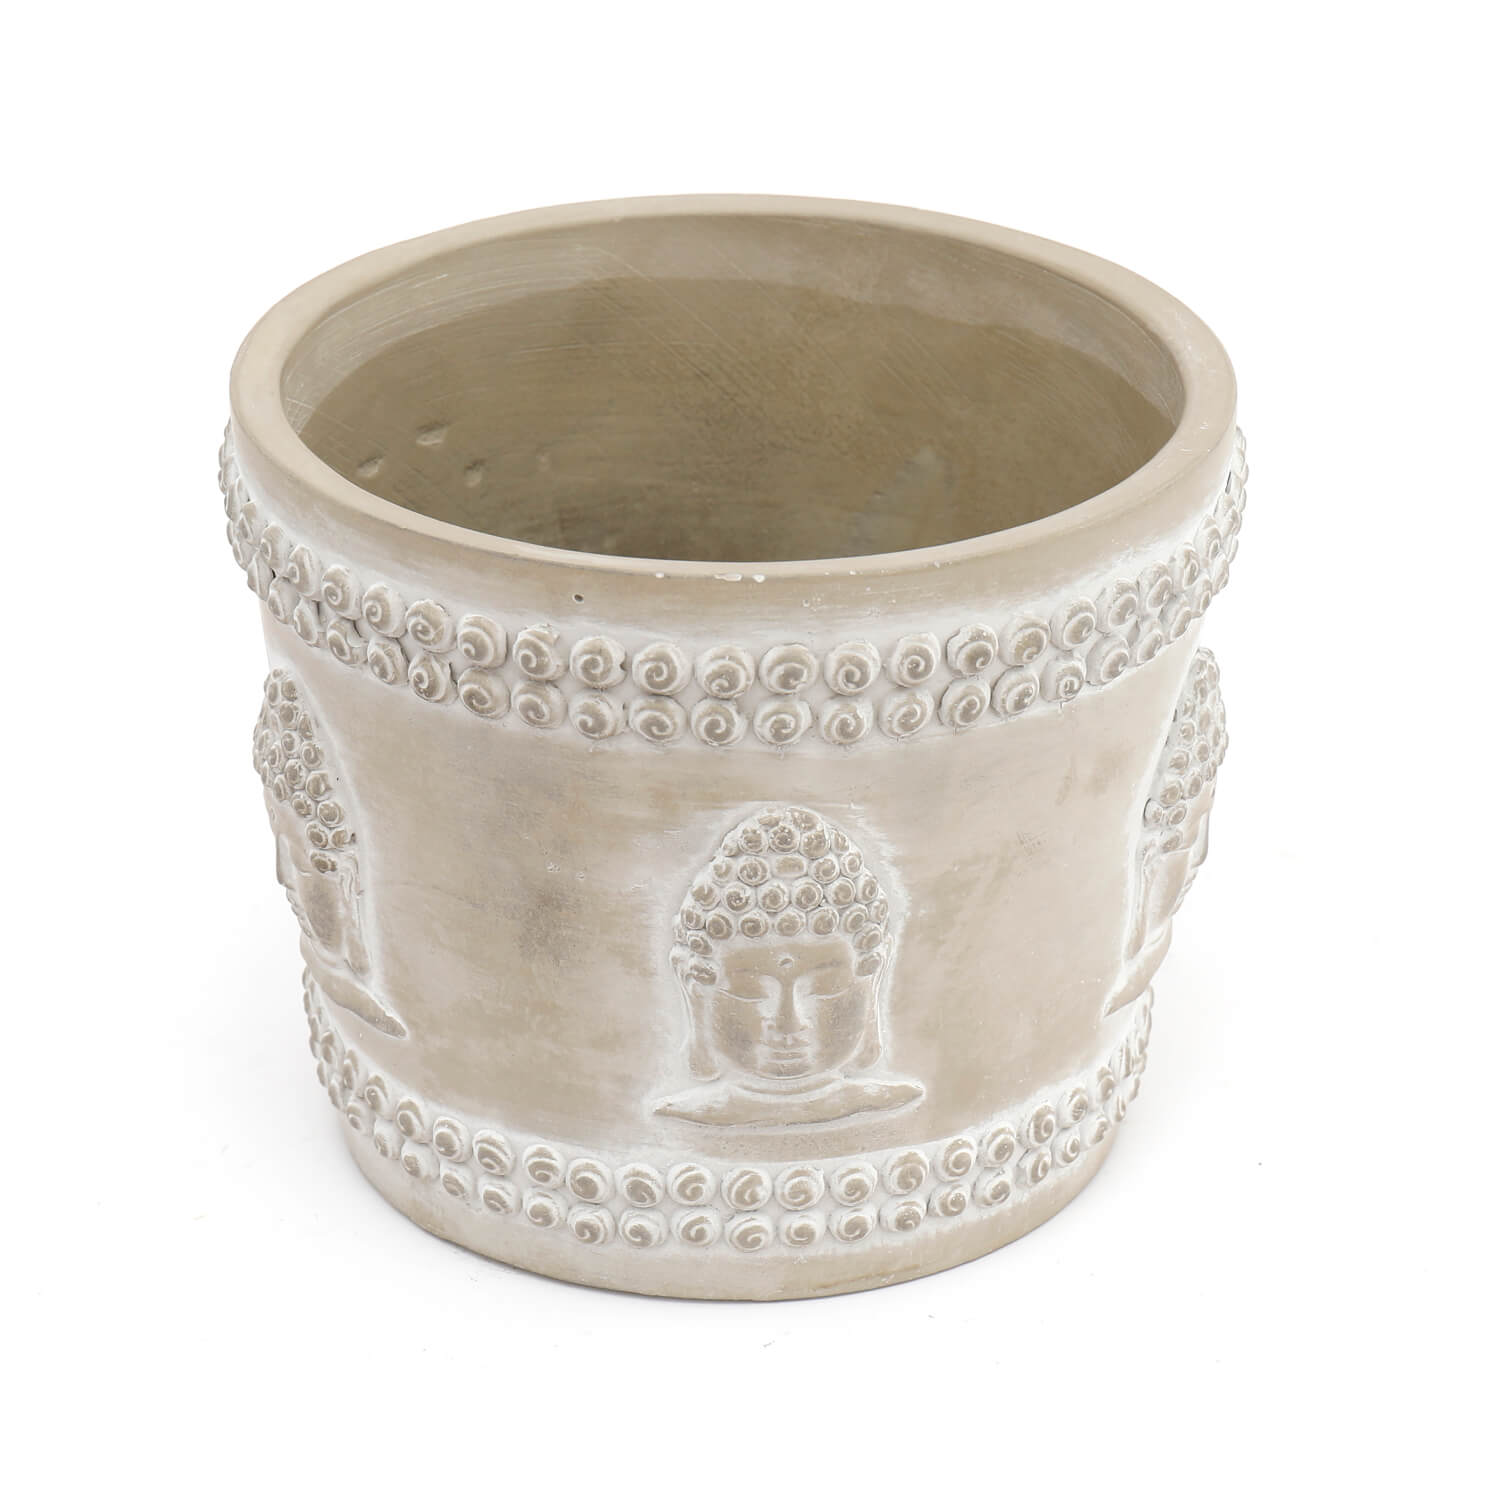 The Home Buddah Planter - 16cm 1 Shaws Department Stores